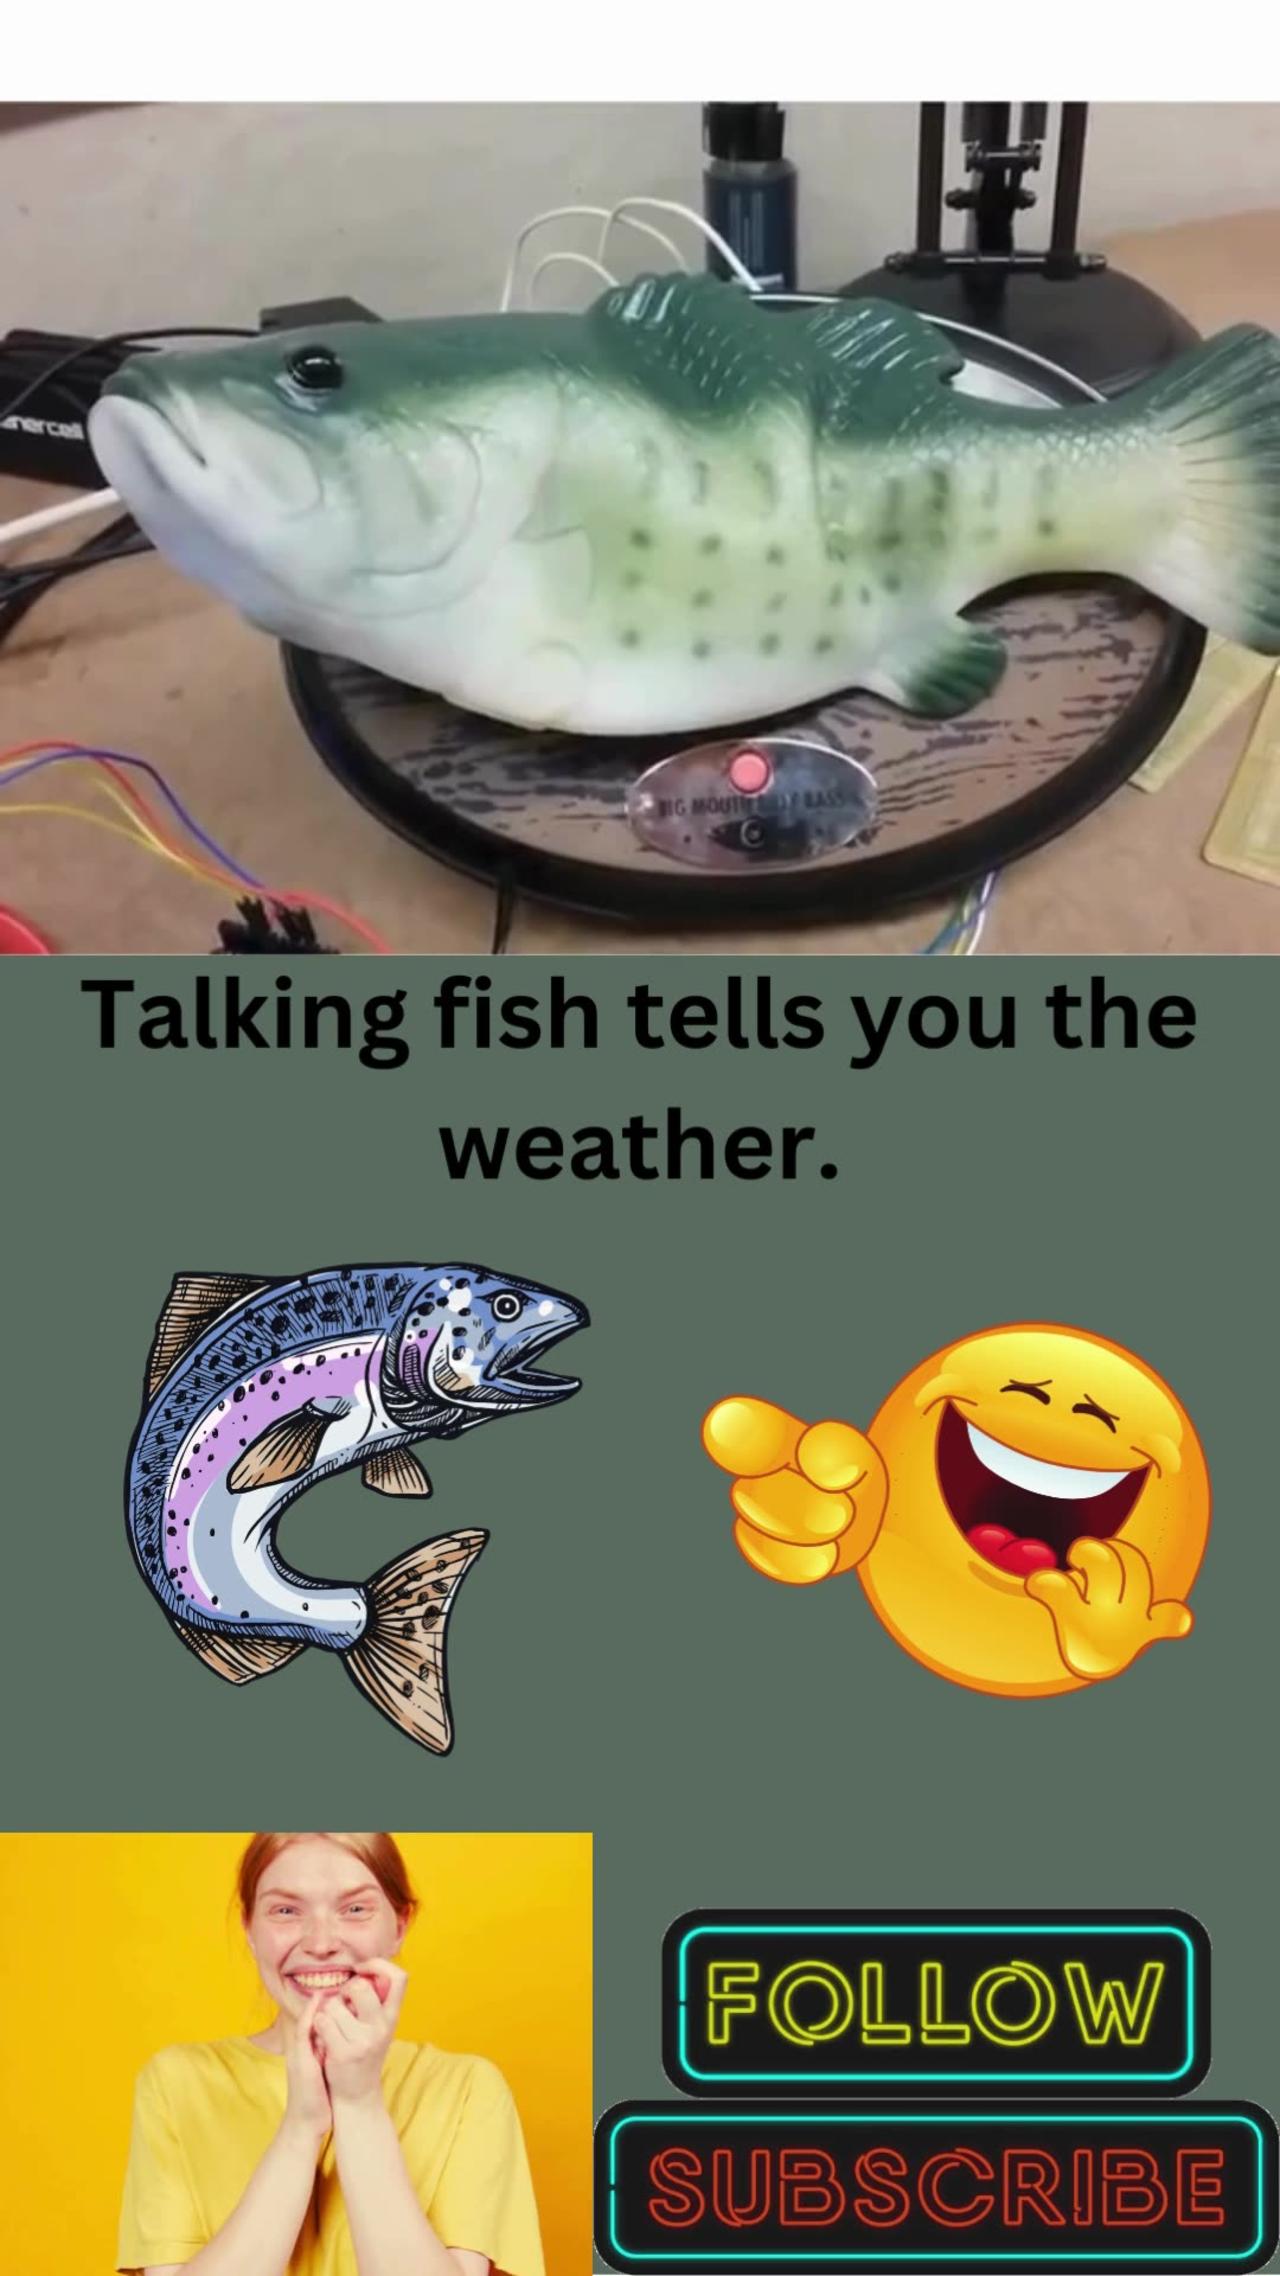 Talking fish tells you the weather!